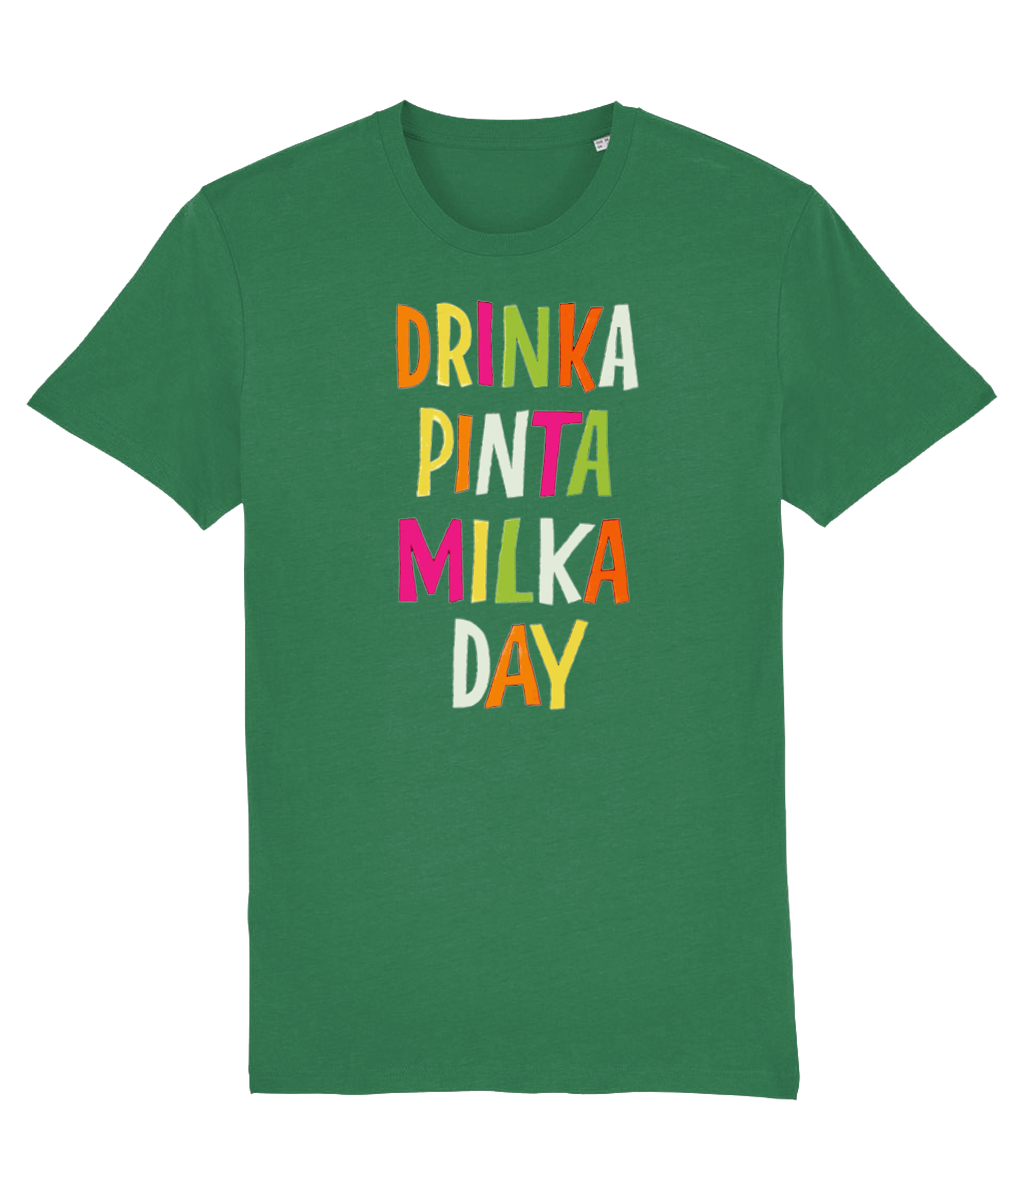 Drink a pinta milk a day-National Dairy Council 1979-T Shirt-GAS T Shirts